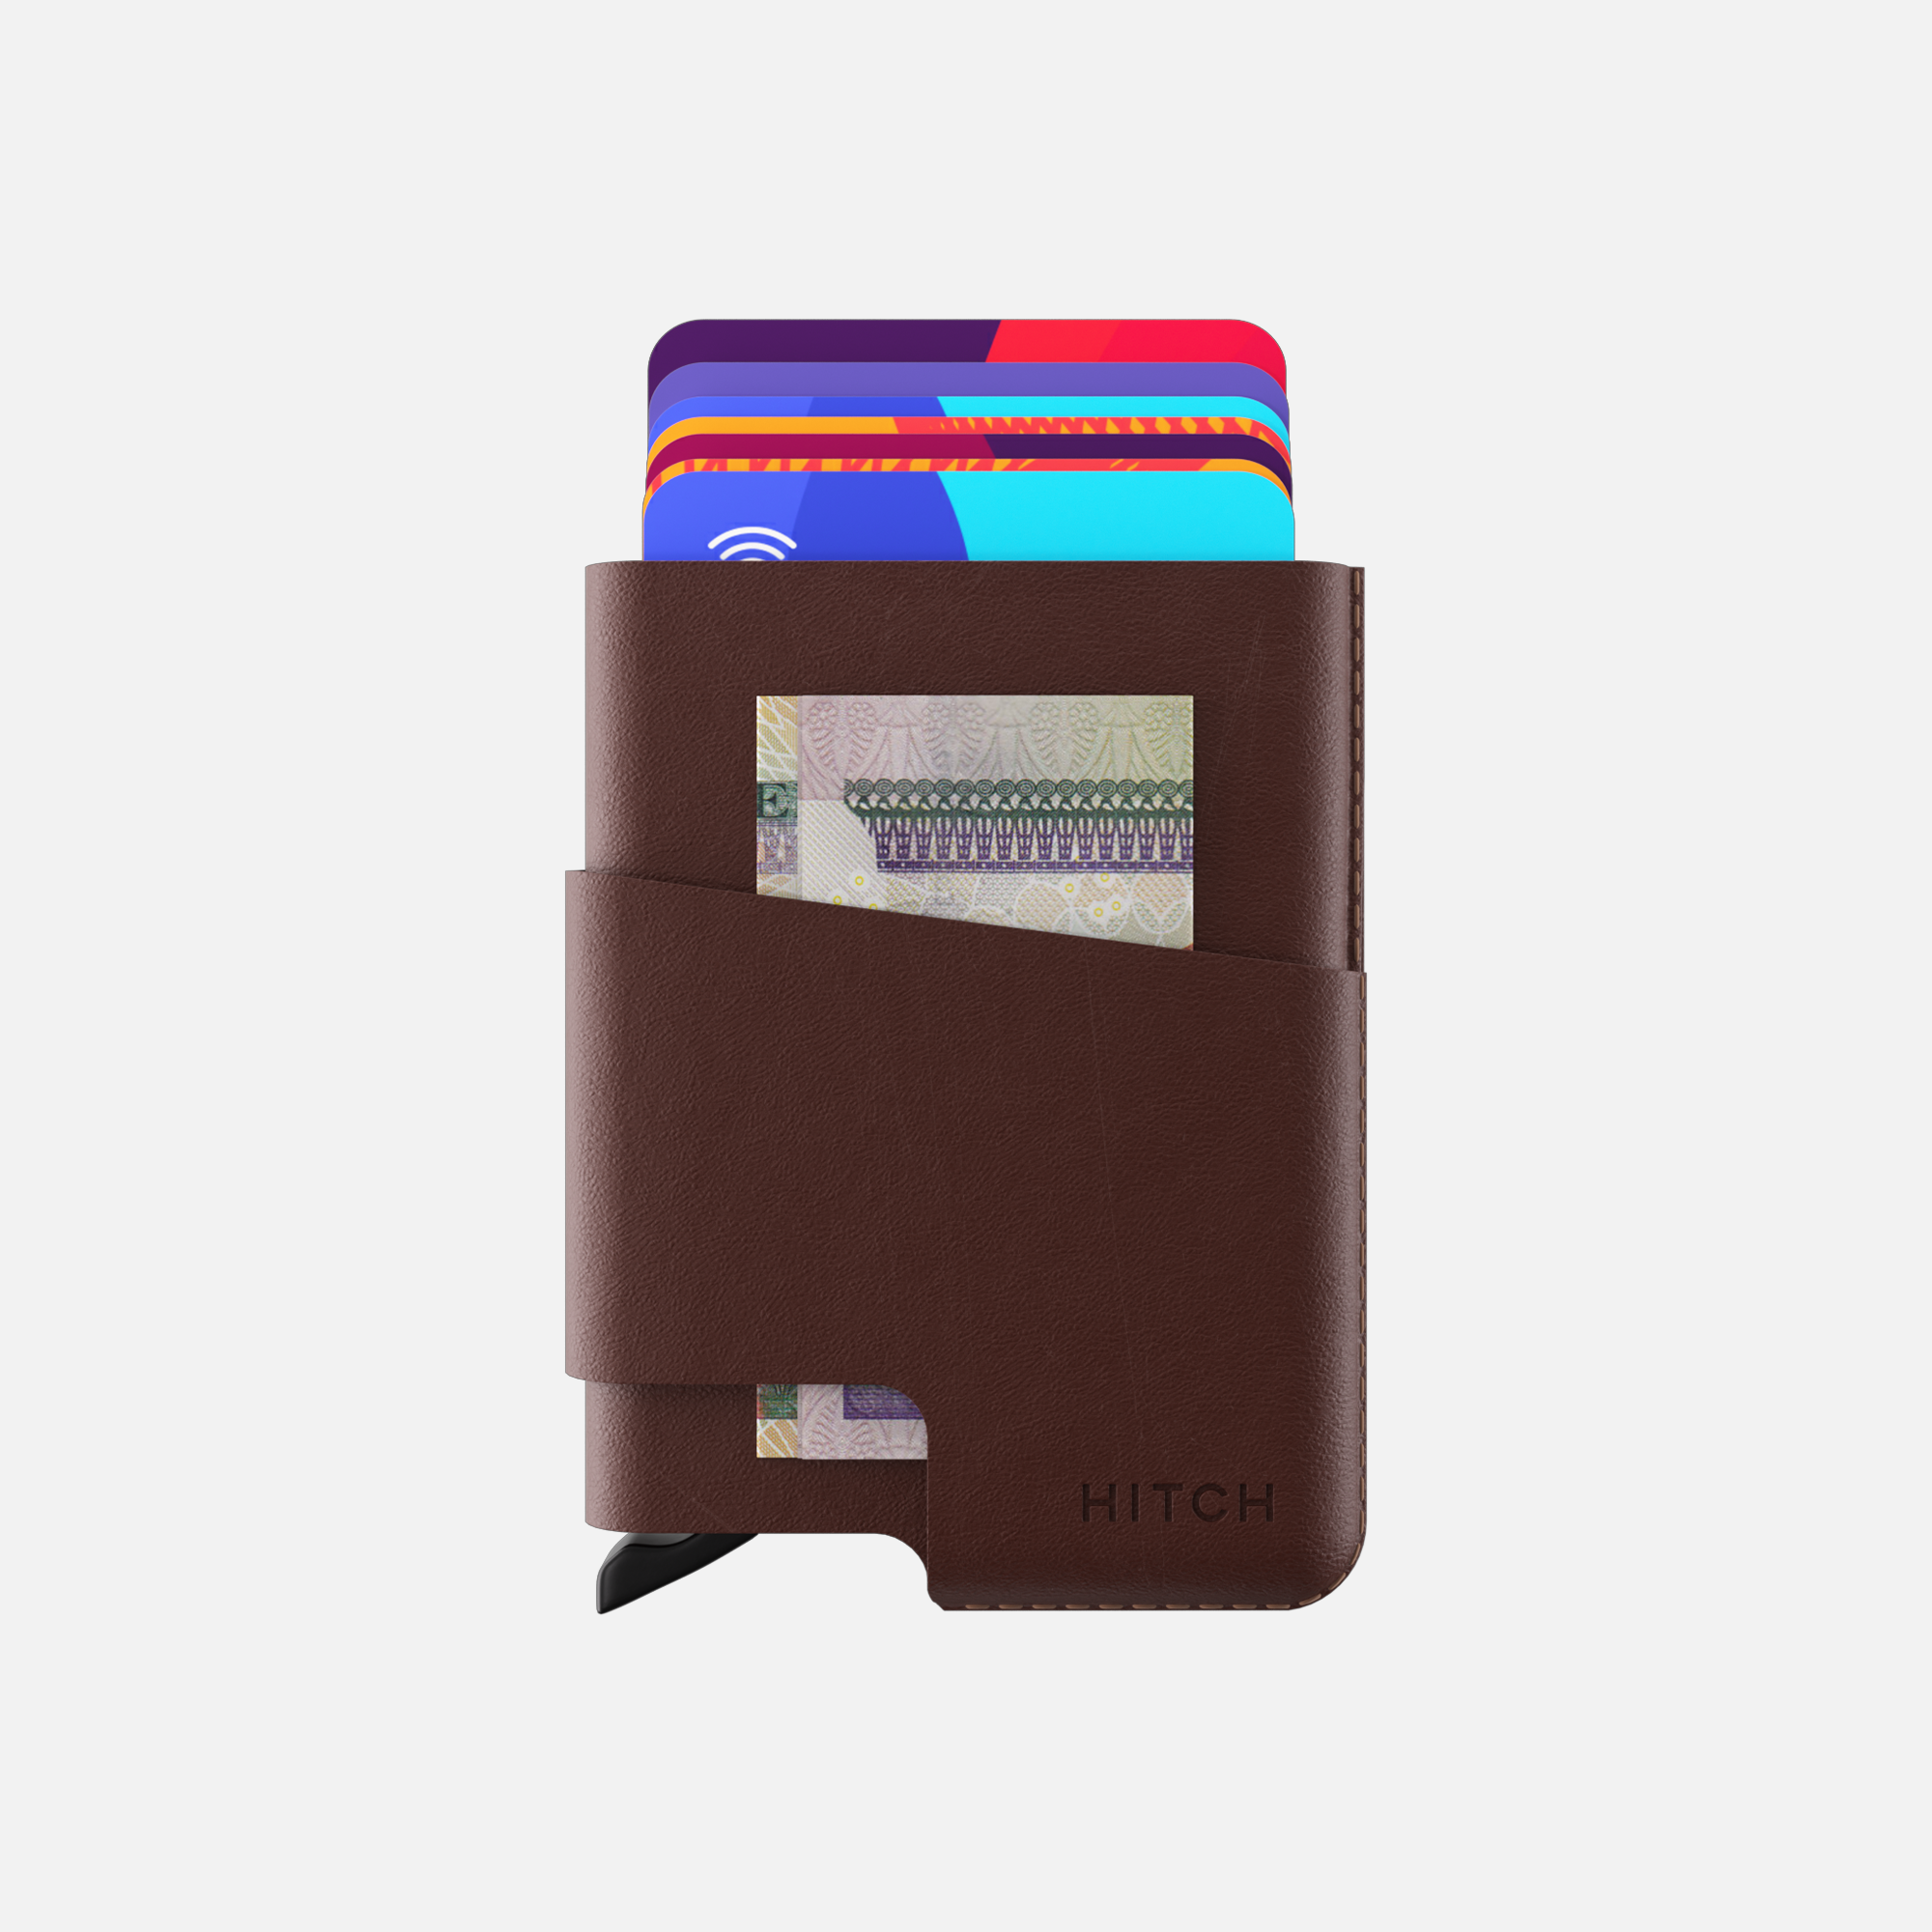 Brown leather cardholder wallet with multiple cards and money clip on white background.